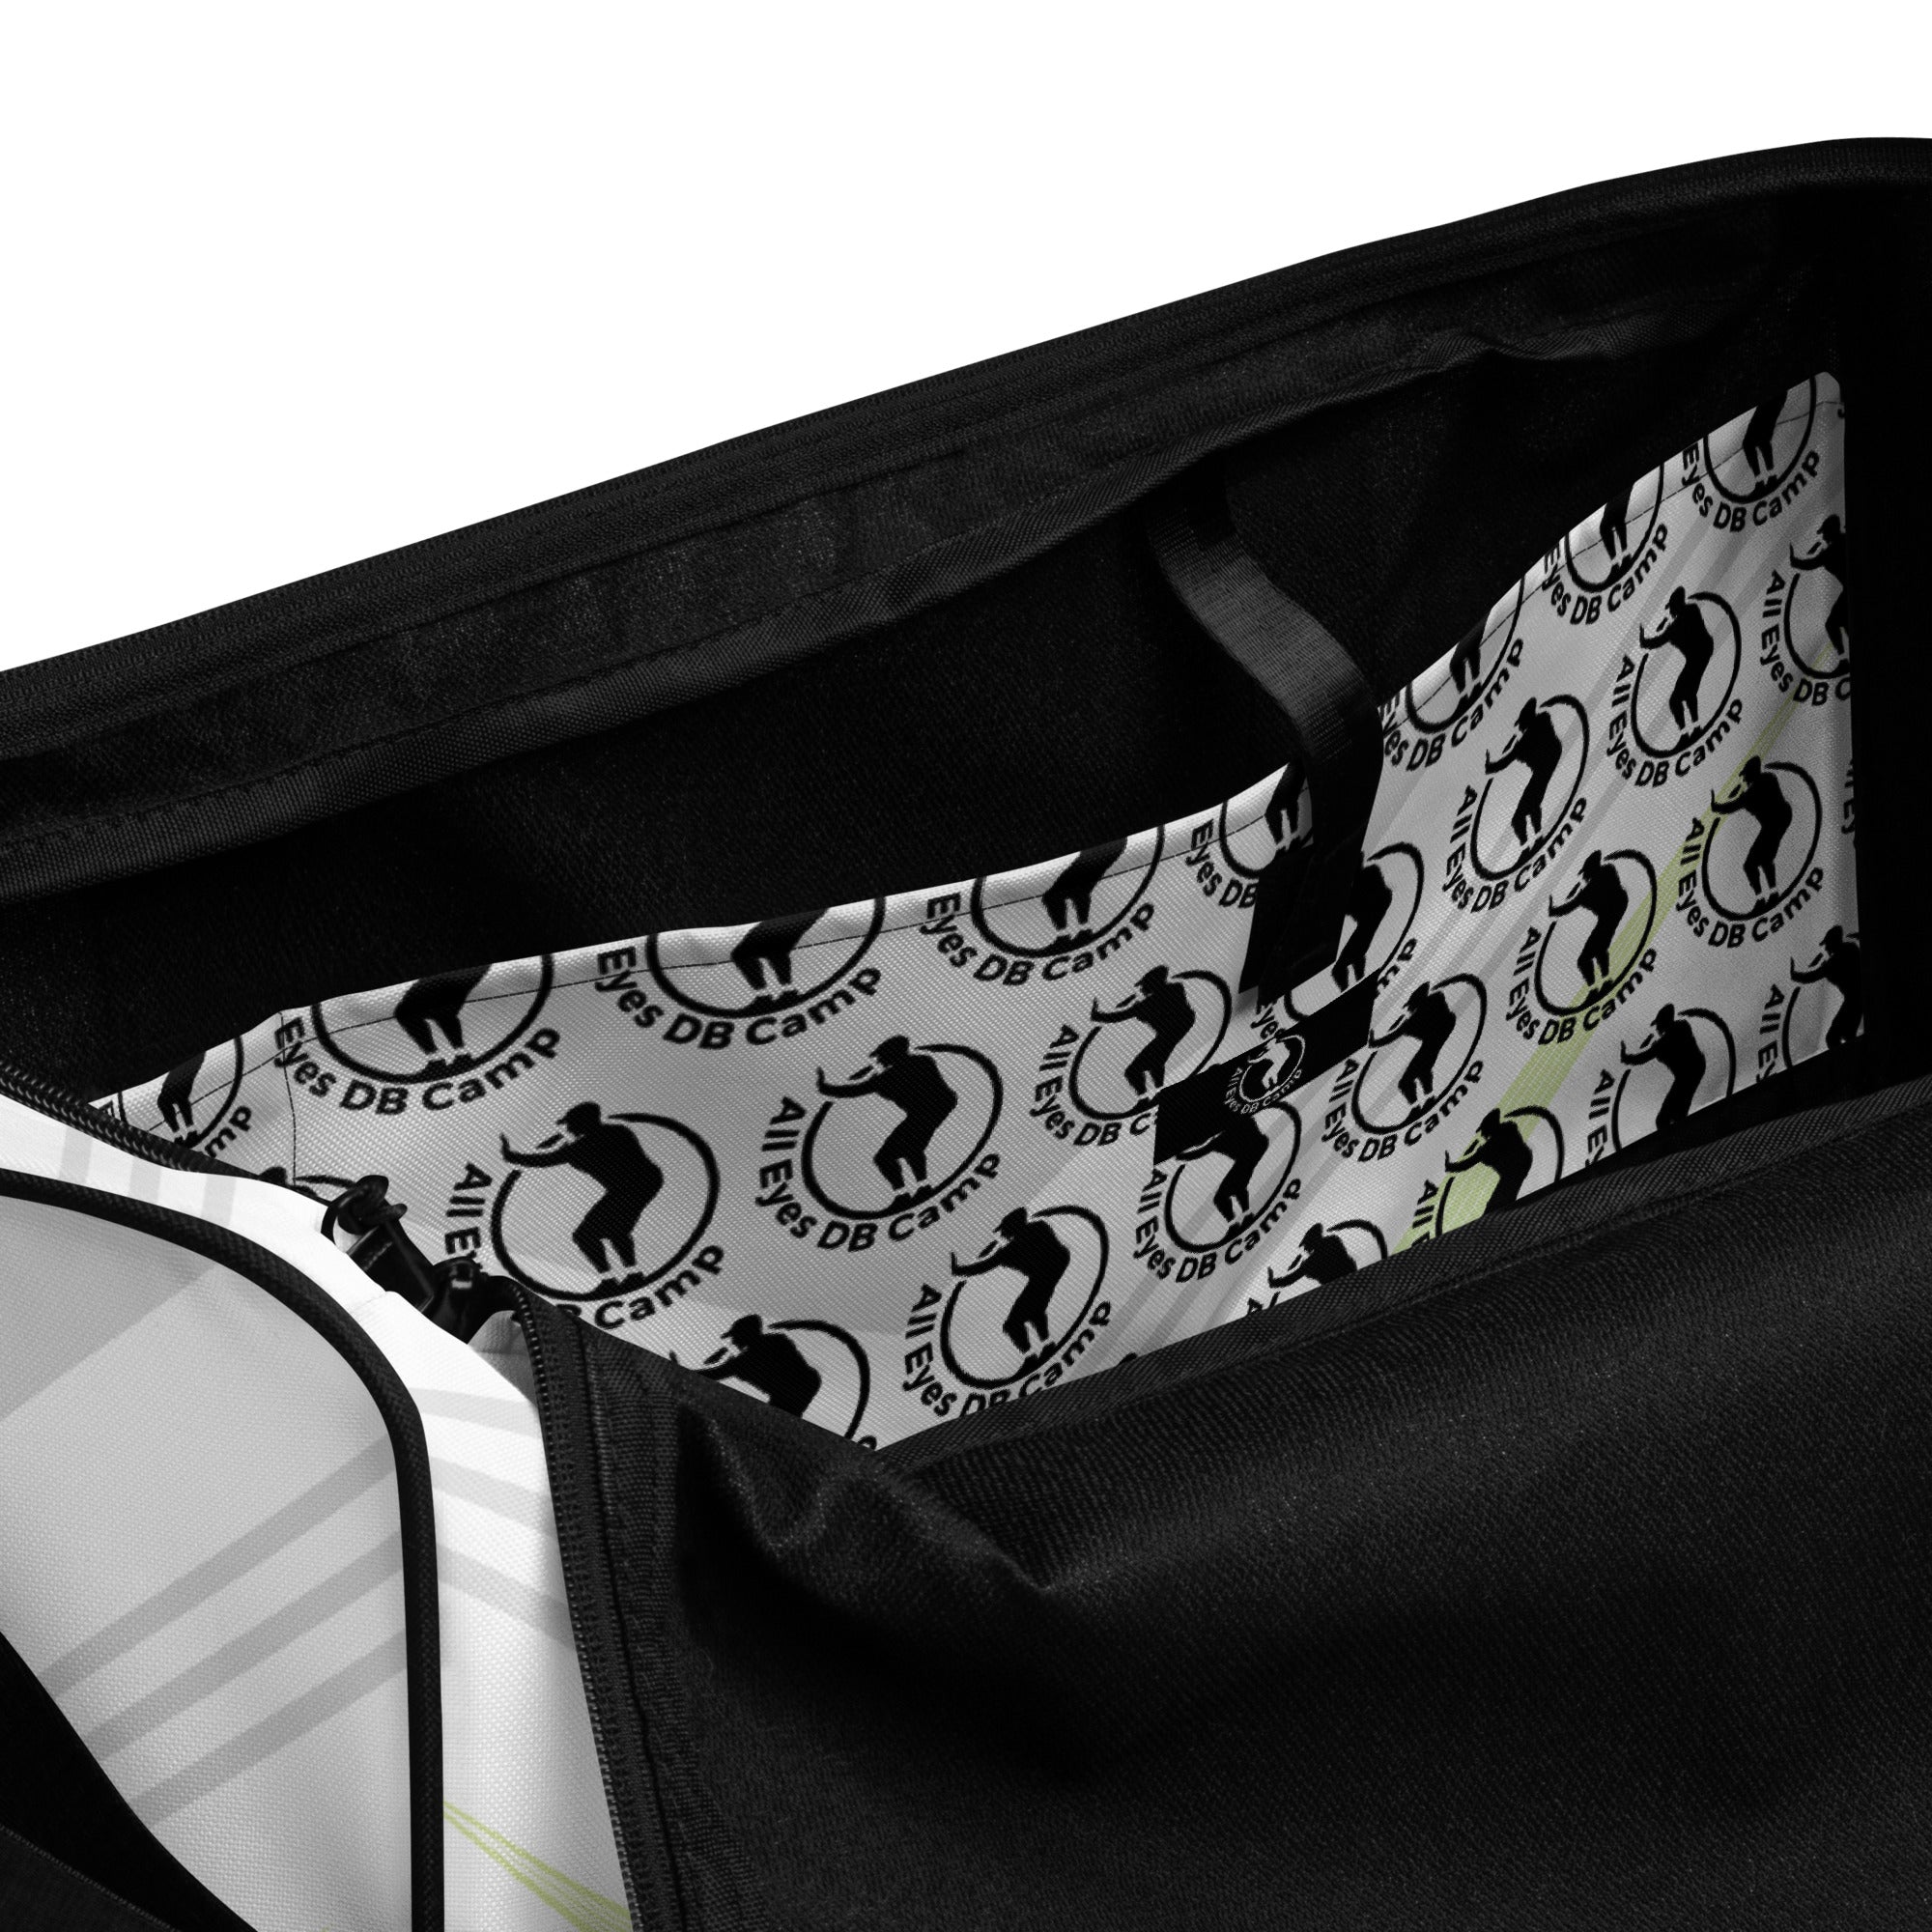 All Eyes 'Get to Work' Duffle Bag (White)